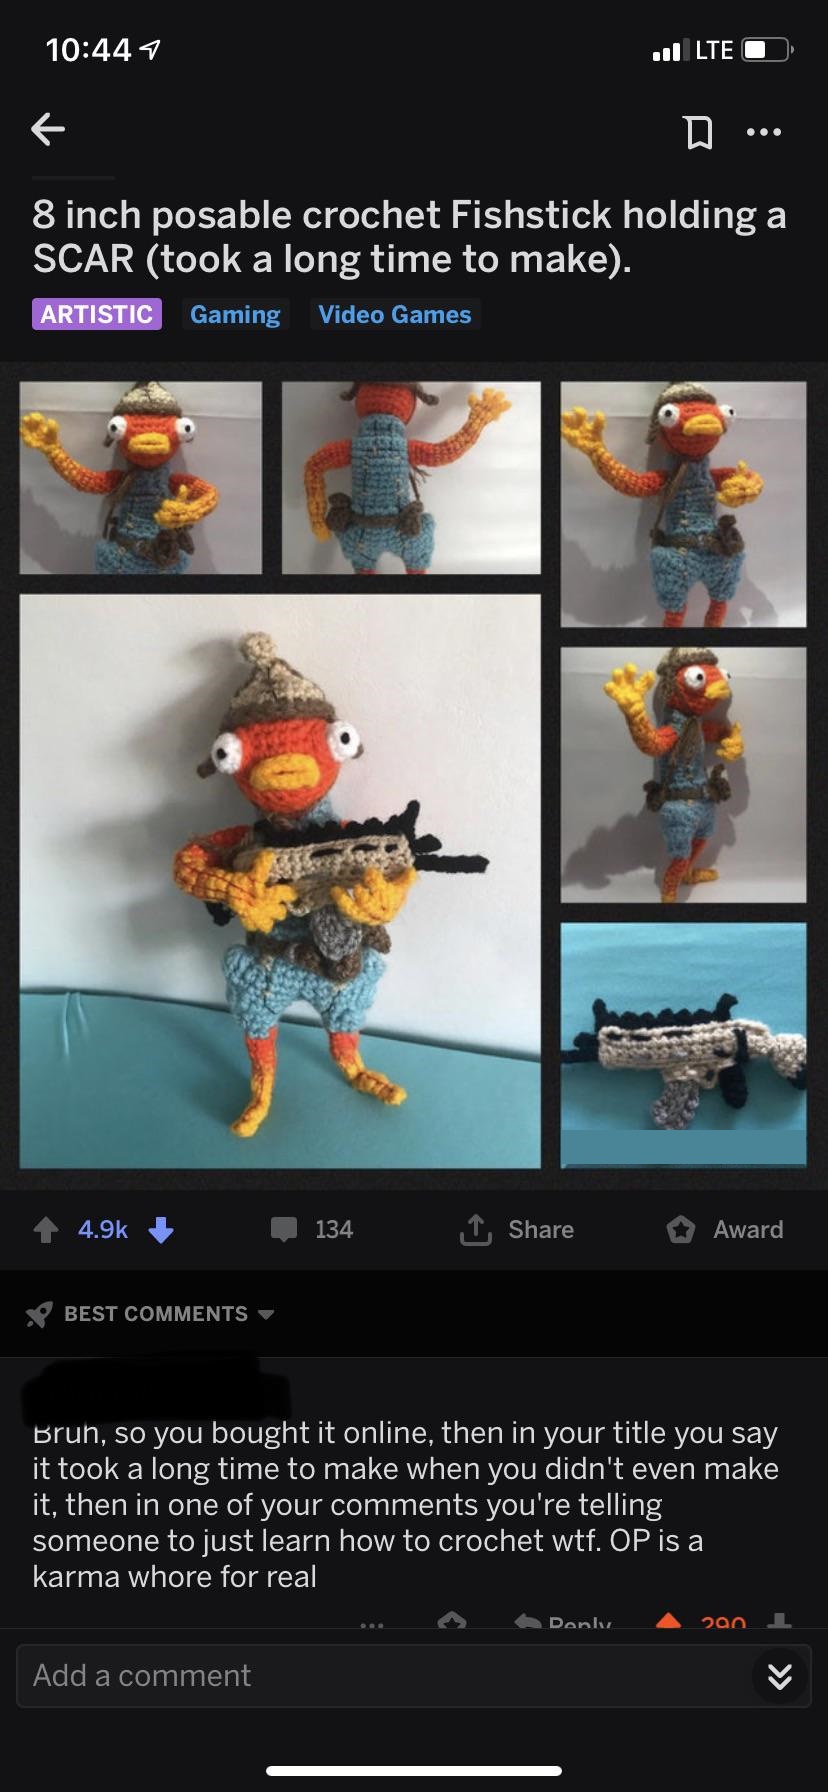 8 inch posable crochet Fishstick holding a Scar took a long time to make. Artistic Gaming Video Games 134 | Award Best Brun, so you bought it online, then in your title you say it took a long time to make when you didn't even